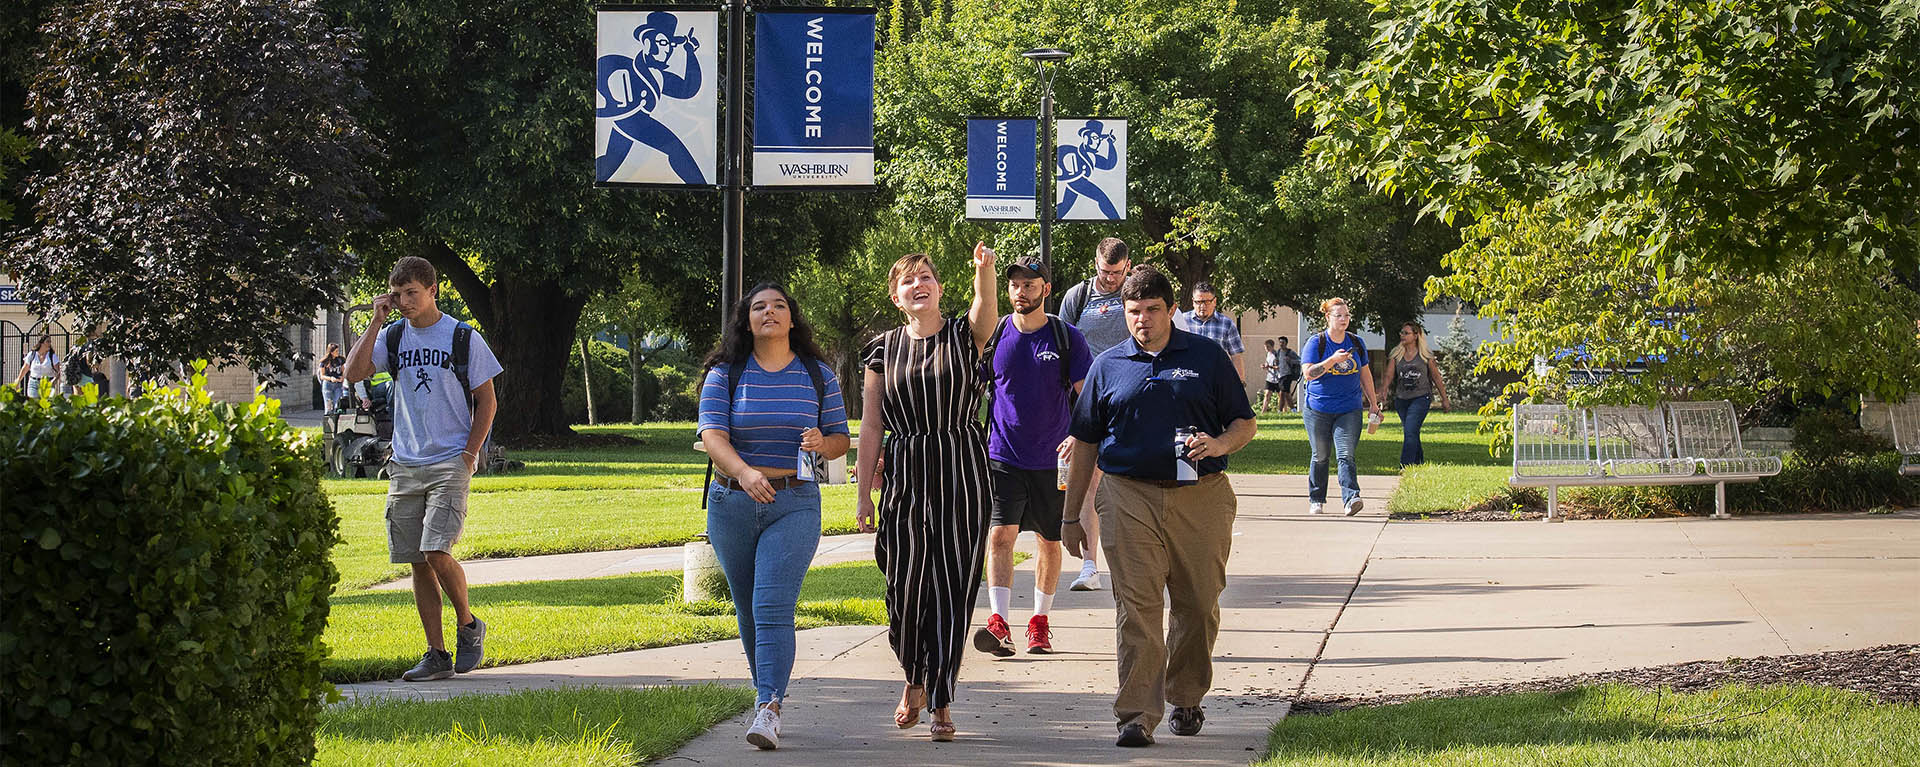 Students are shown around on campus on a sunny day